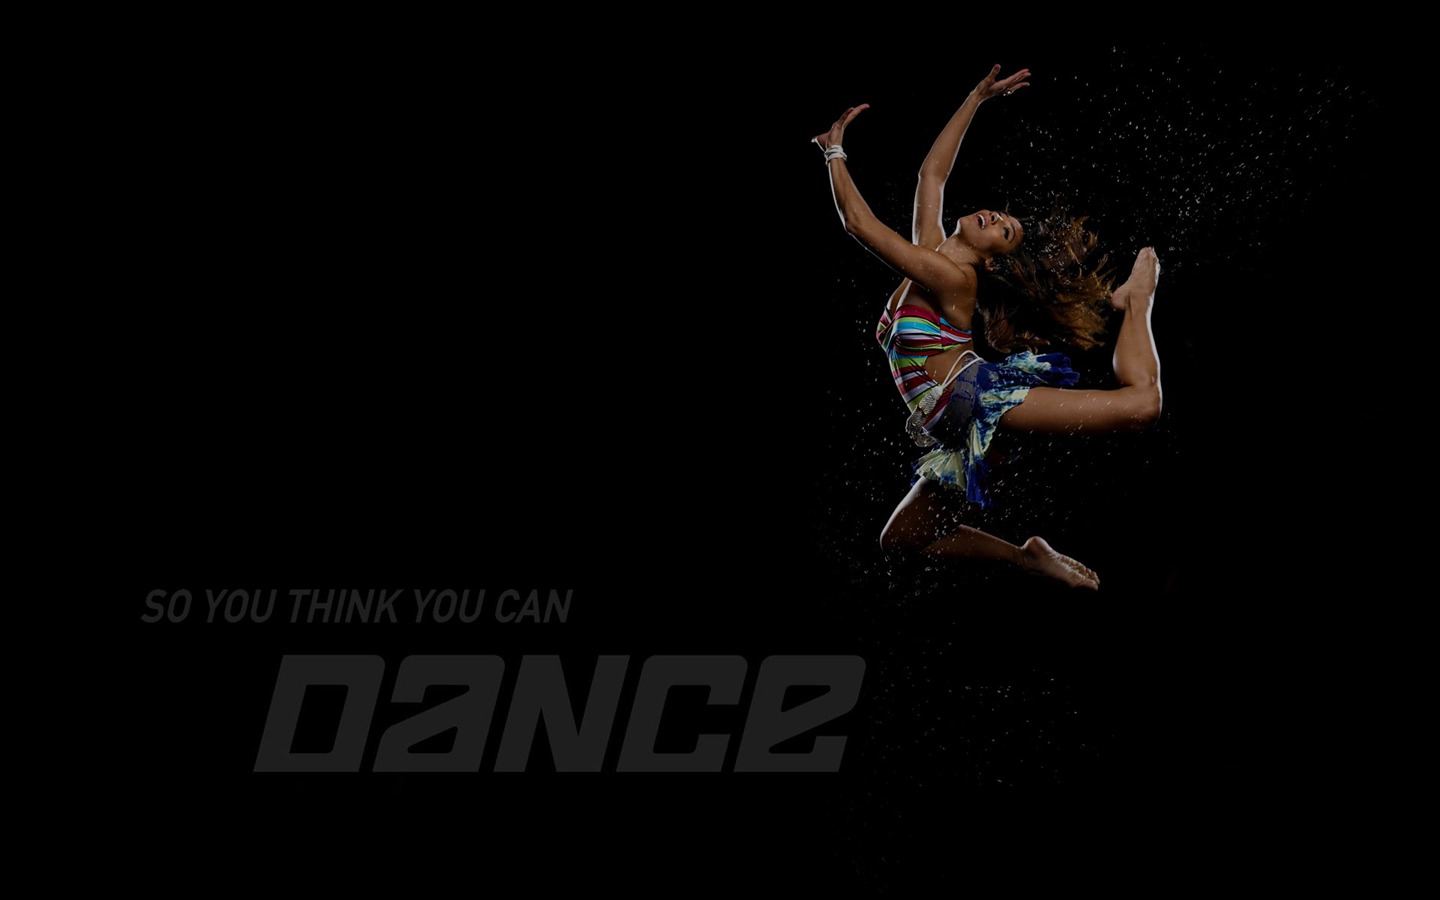 So You Think You Can Dance 舞林爭霸壁紙(二) #17 - 1440x900